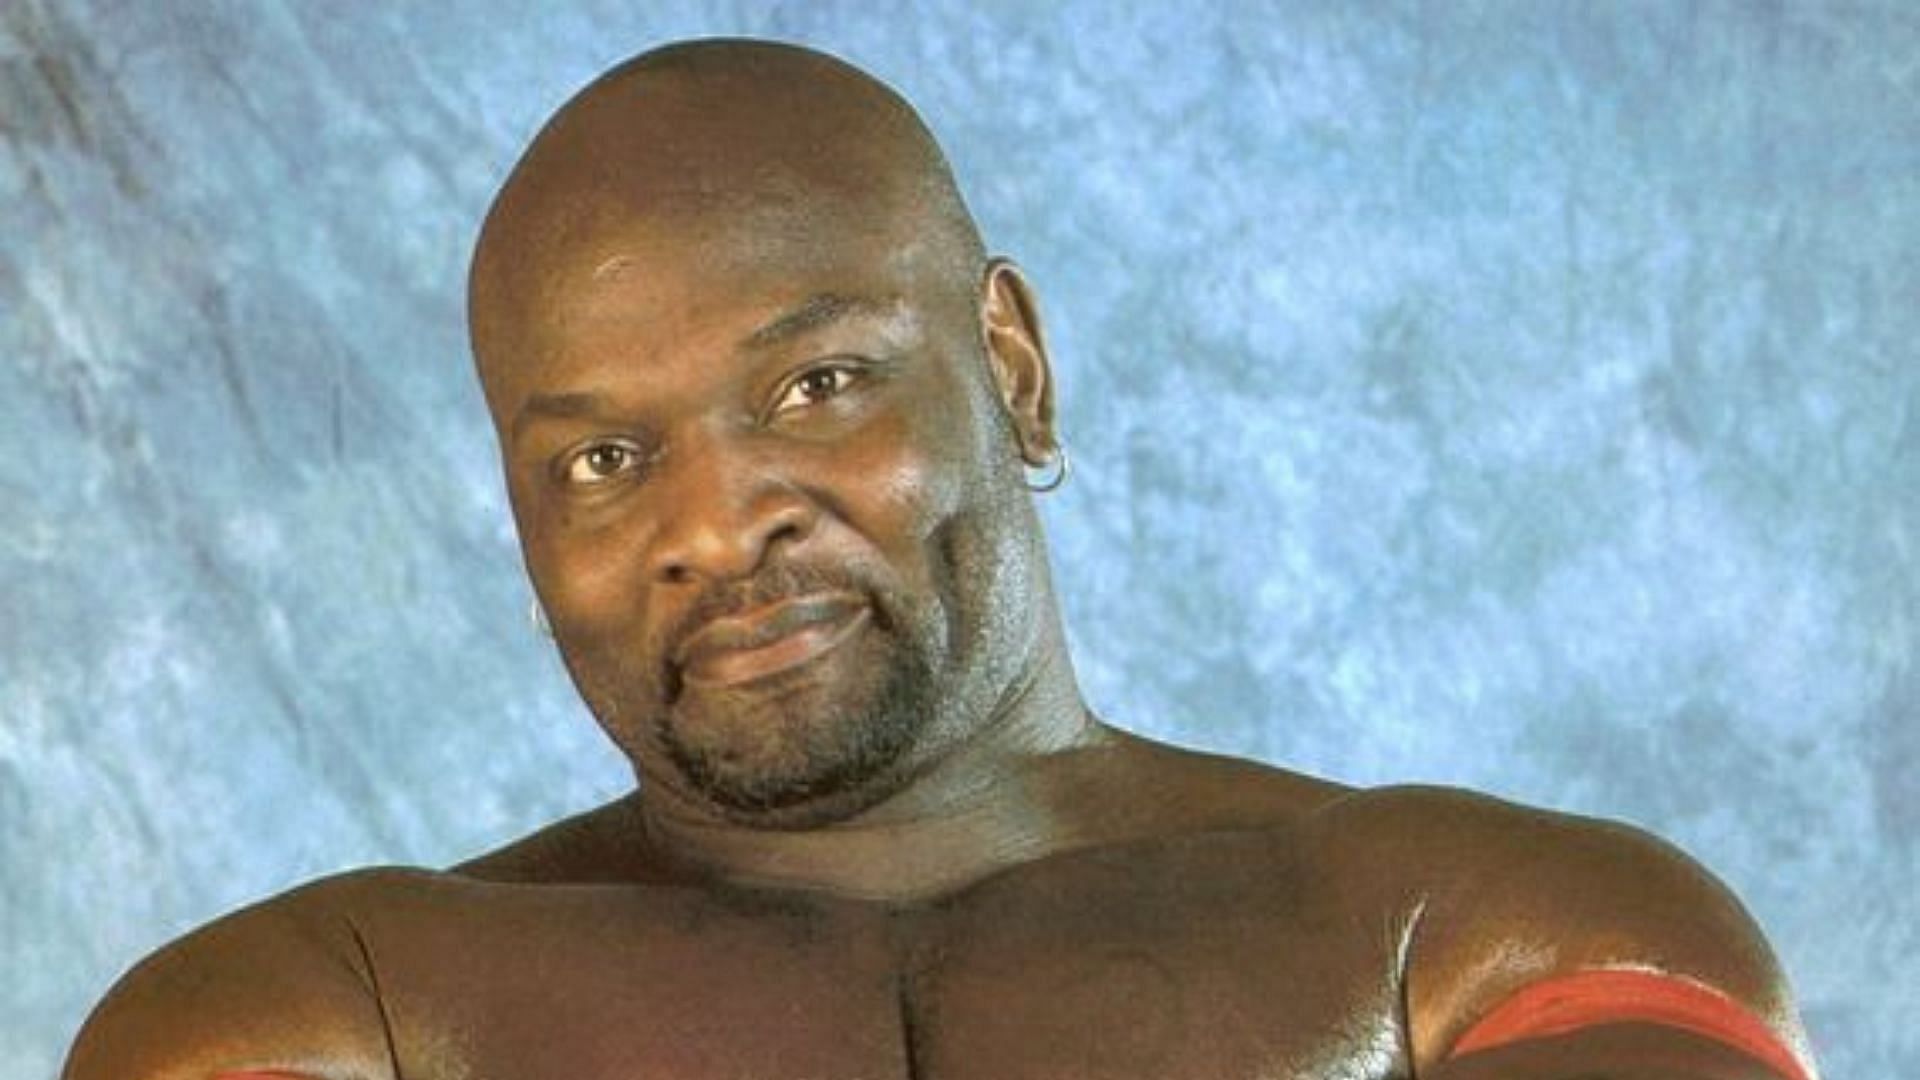 One-time WWE Intercontinental Champion Ahmed Johnson